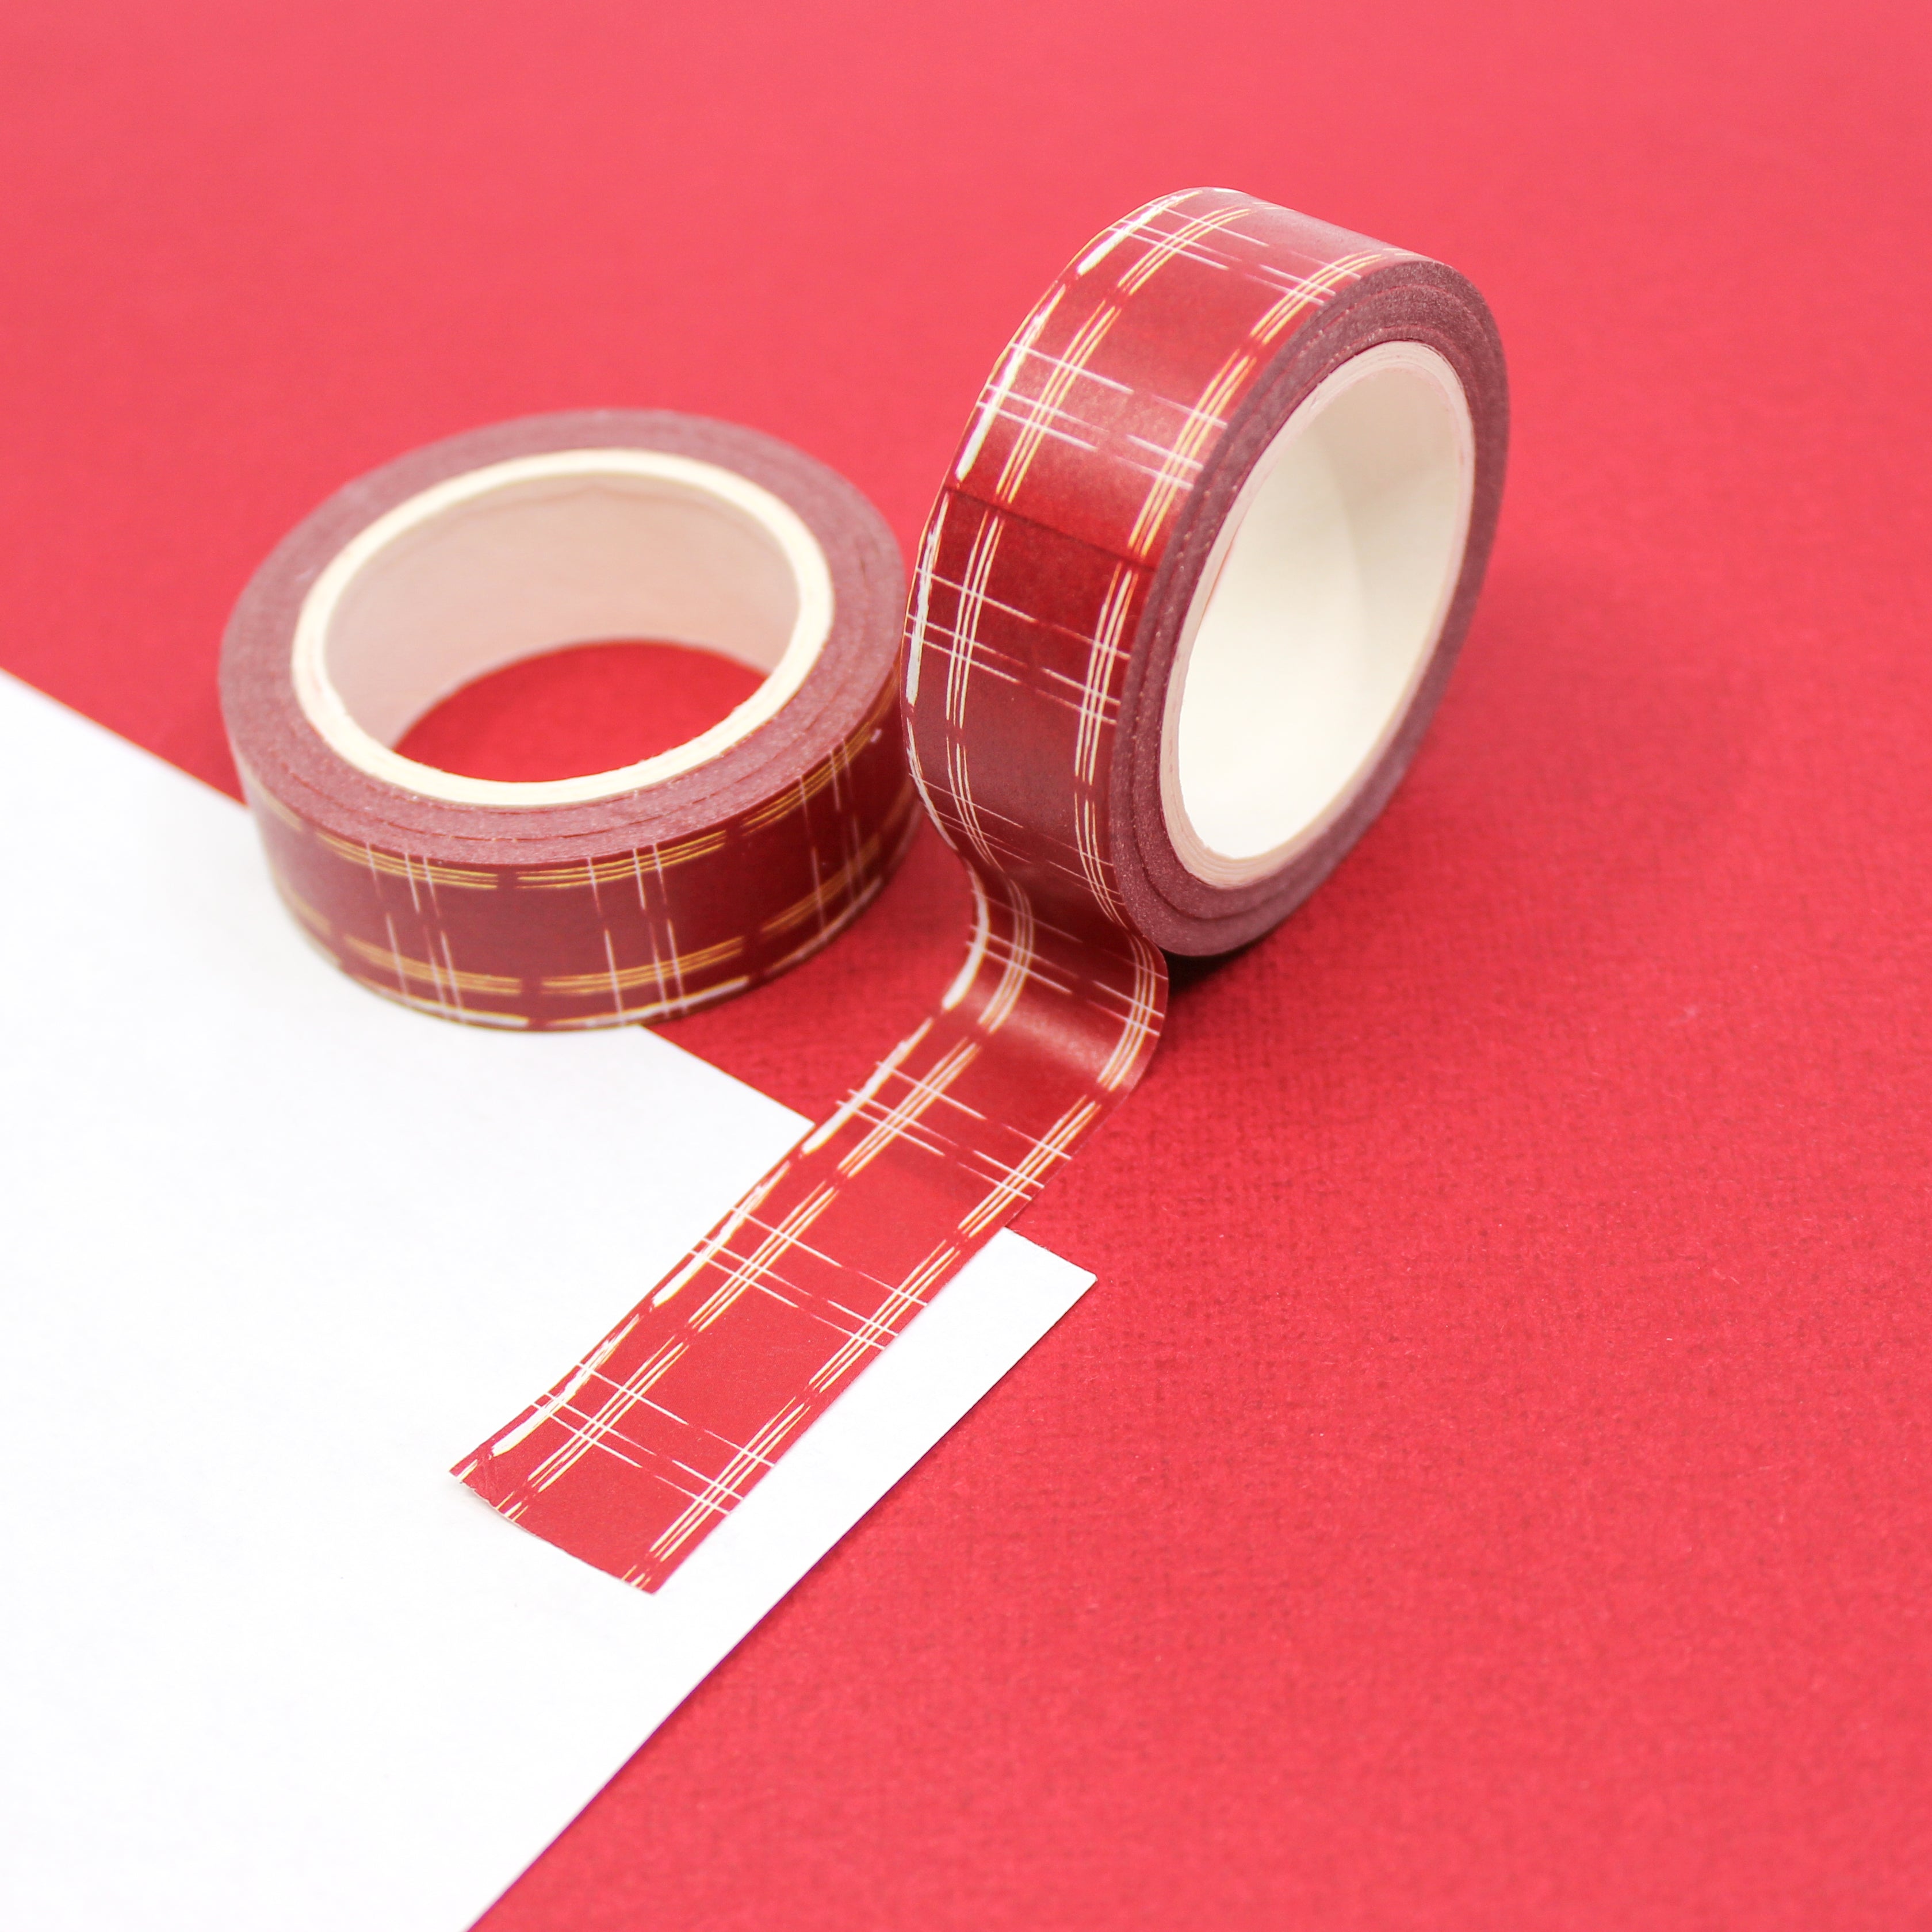 This is a red Christmas plaid view themed washi tape from BBB Supplies Craft Shop